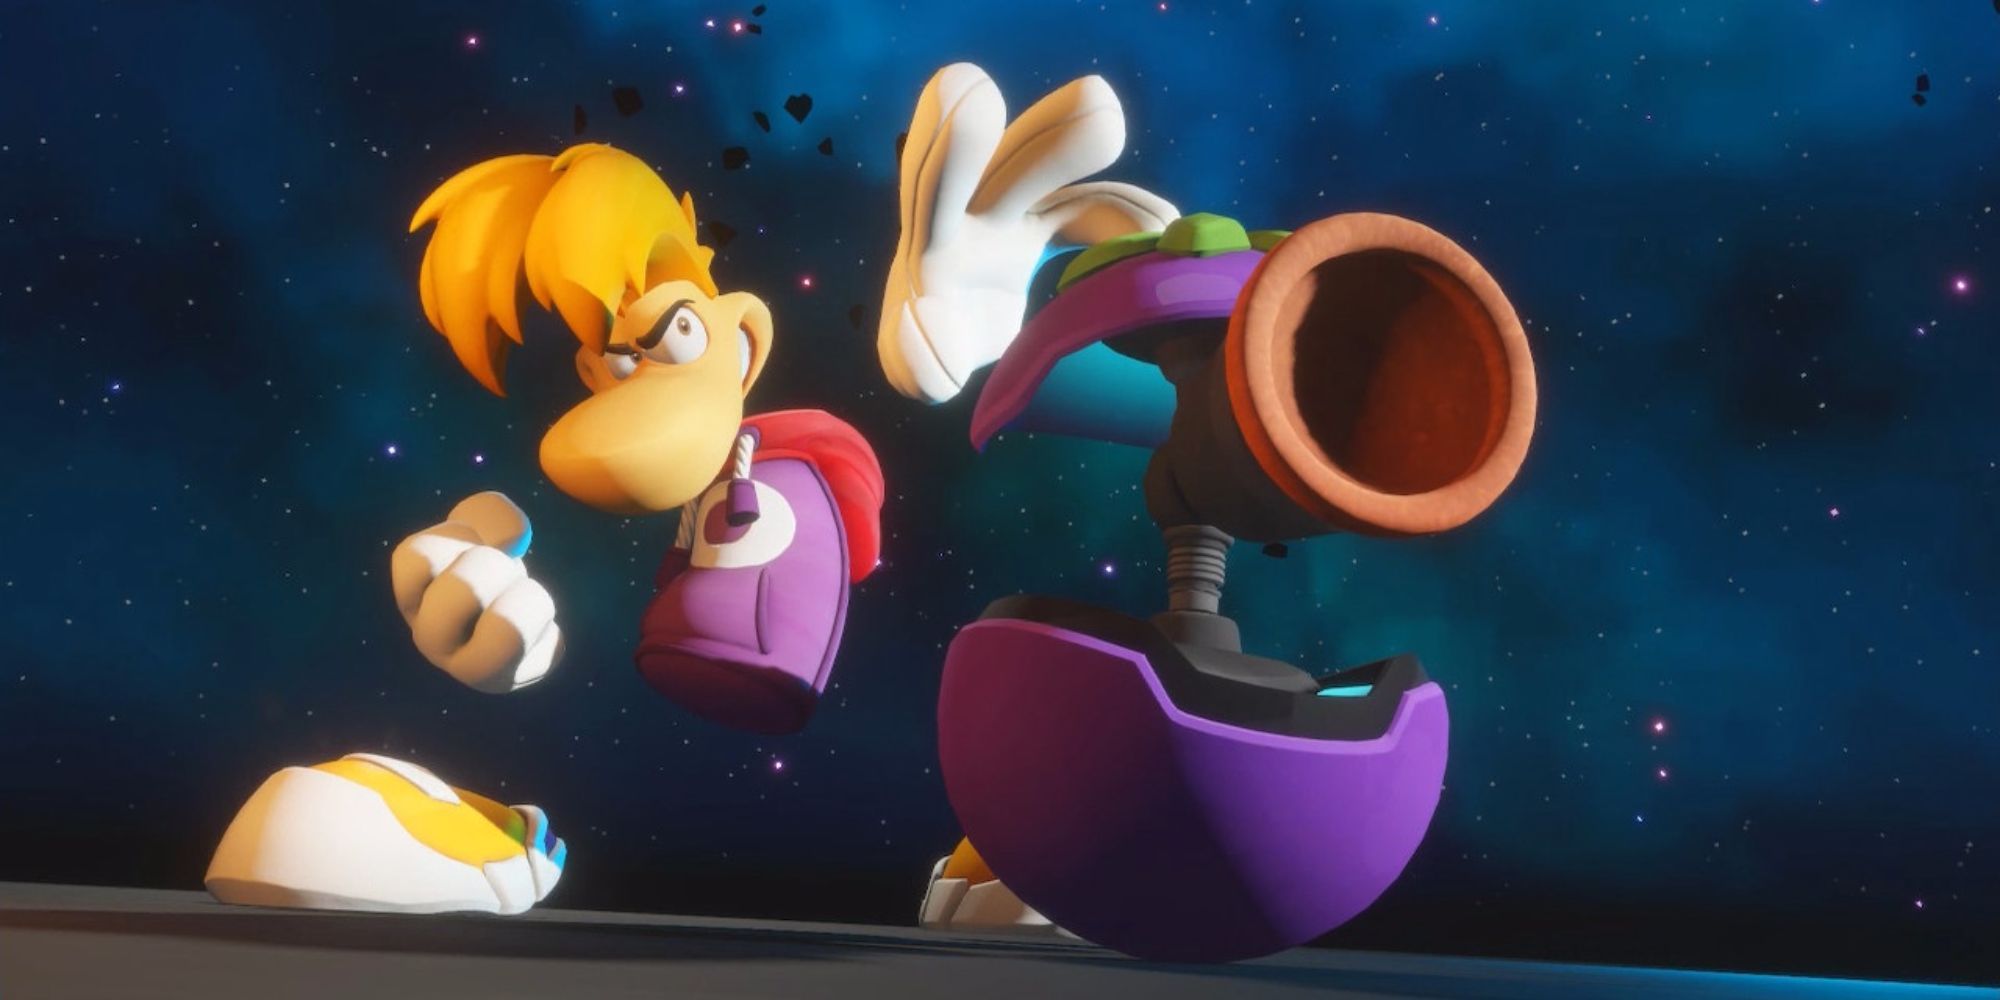 Rayman wielding a plum turret gun in Sparks of Hope's DLC.